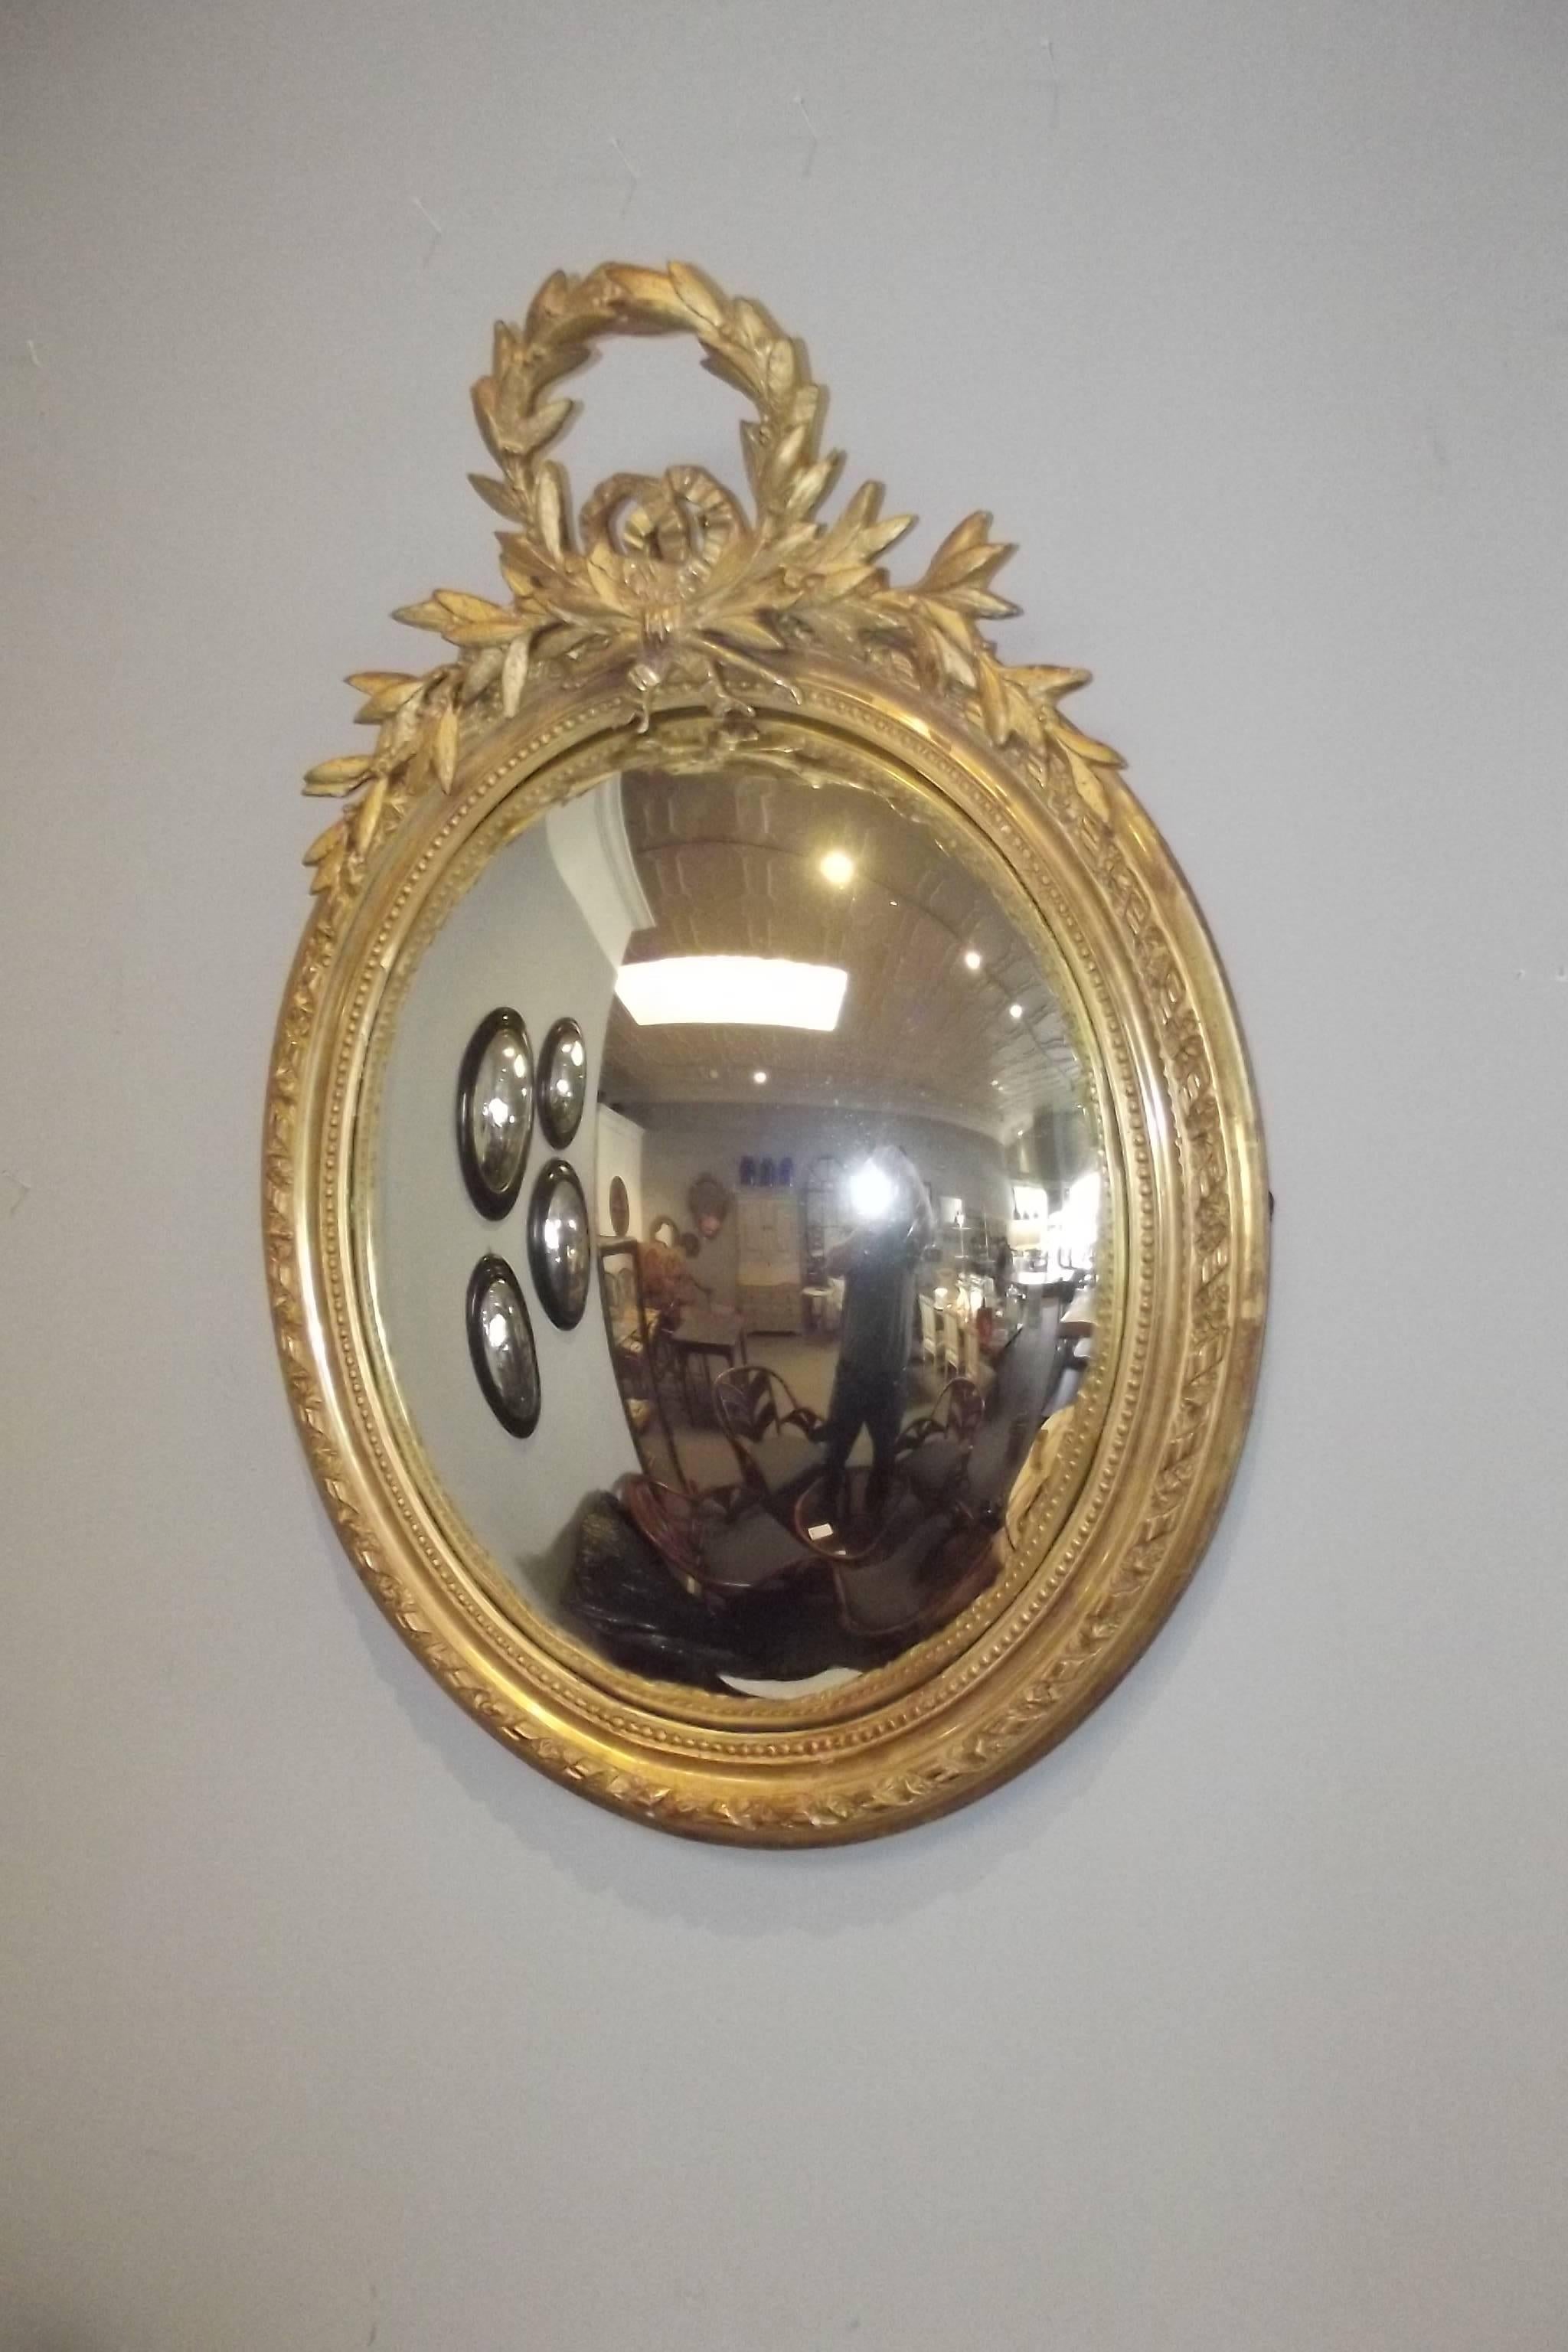 An extremely large scale oval mirror with a gilt frame in the style of Louis XVI and a convex mirror.  It dates from the middle of the 19th century and retains much of its original gilt finish.